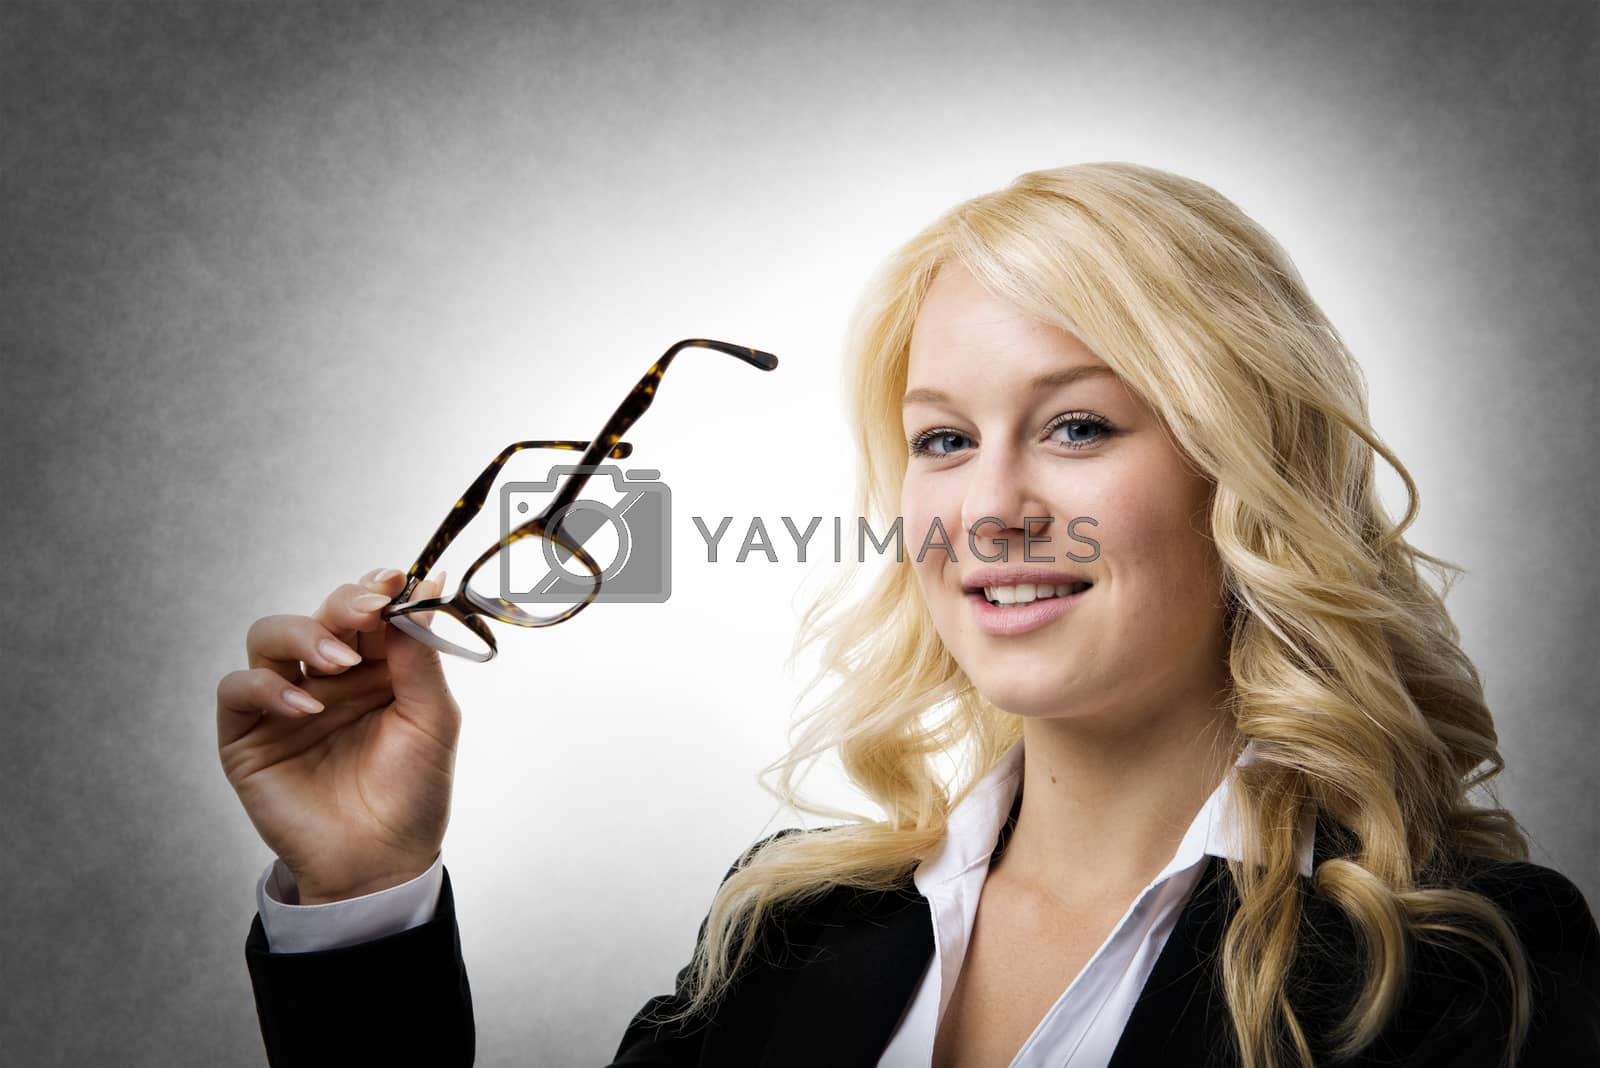 Royalty free image of woman with glasses by w20er